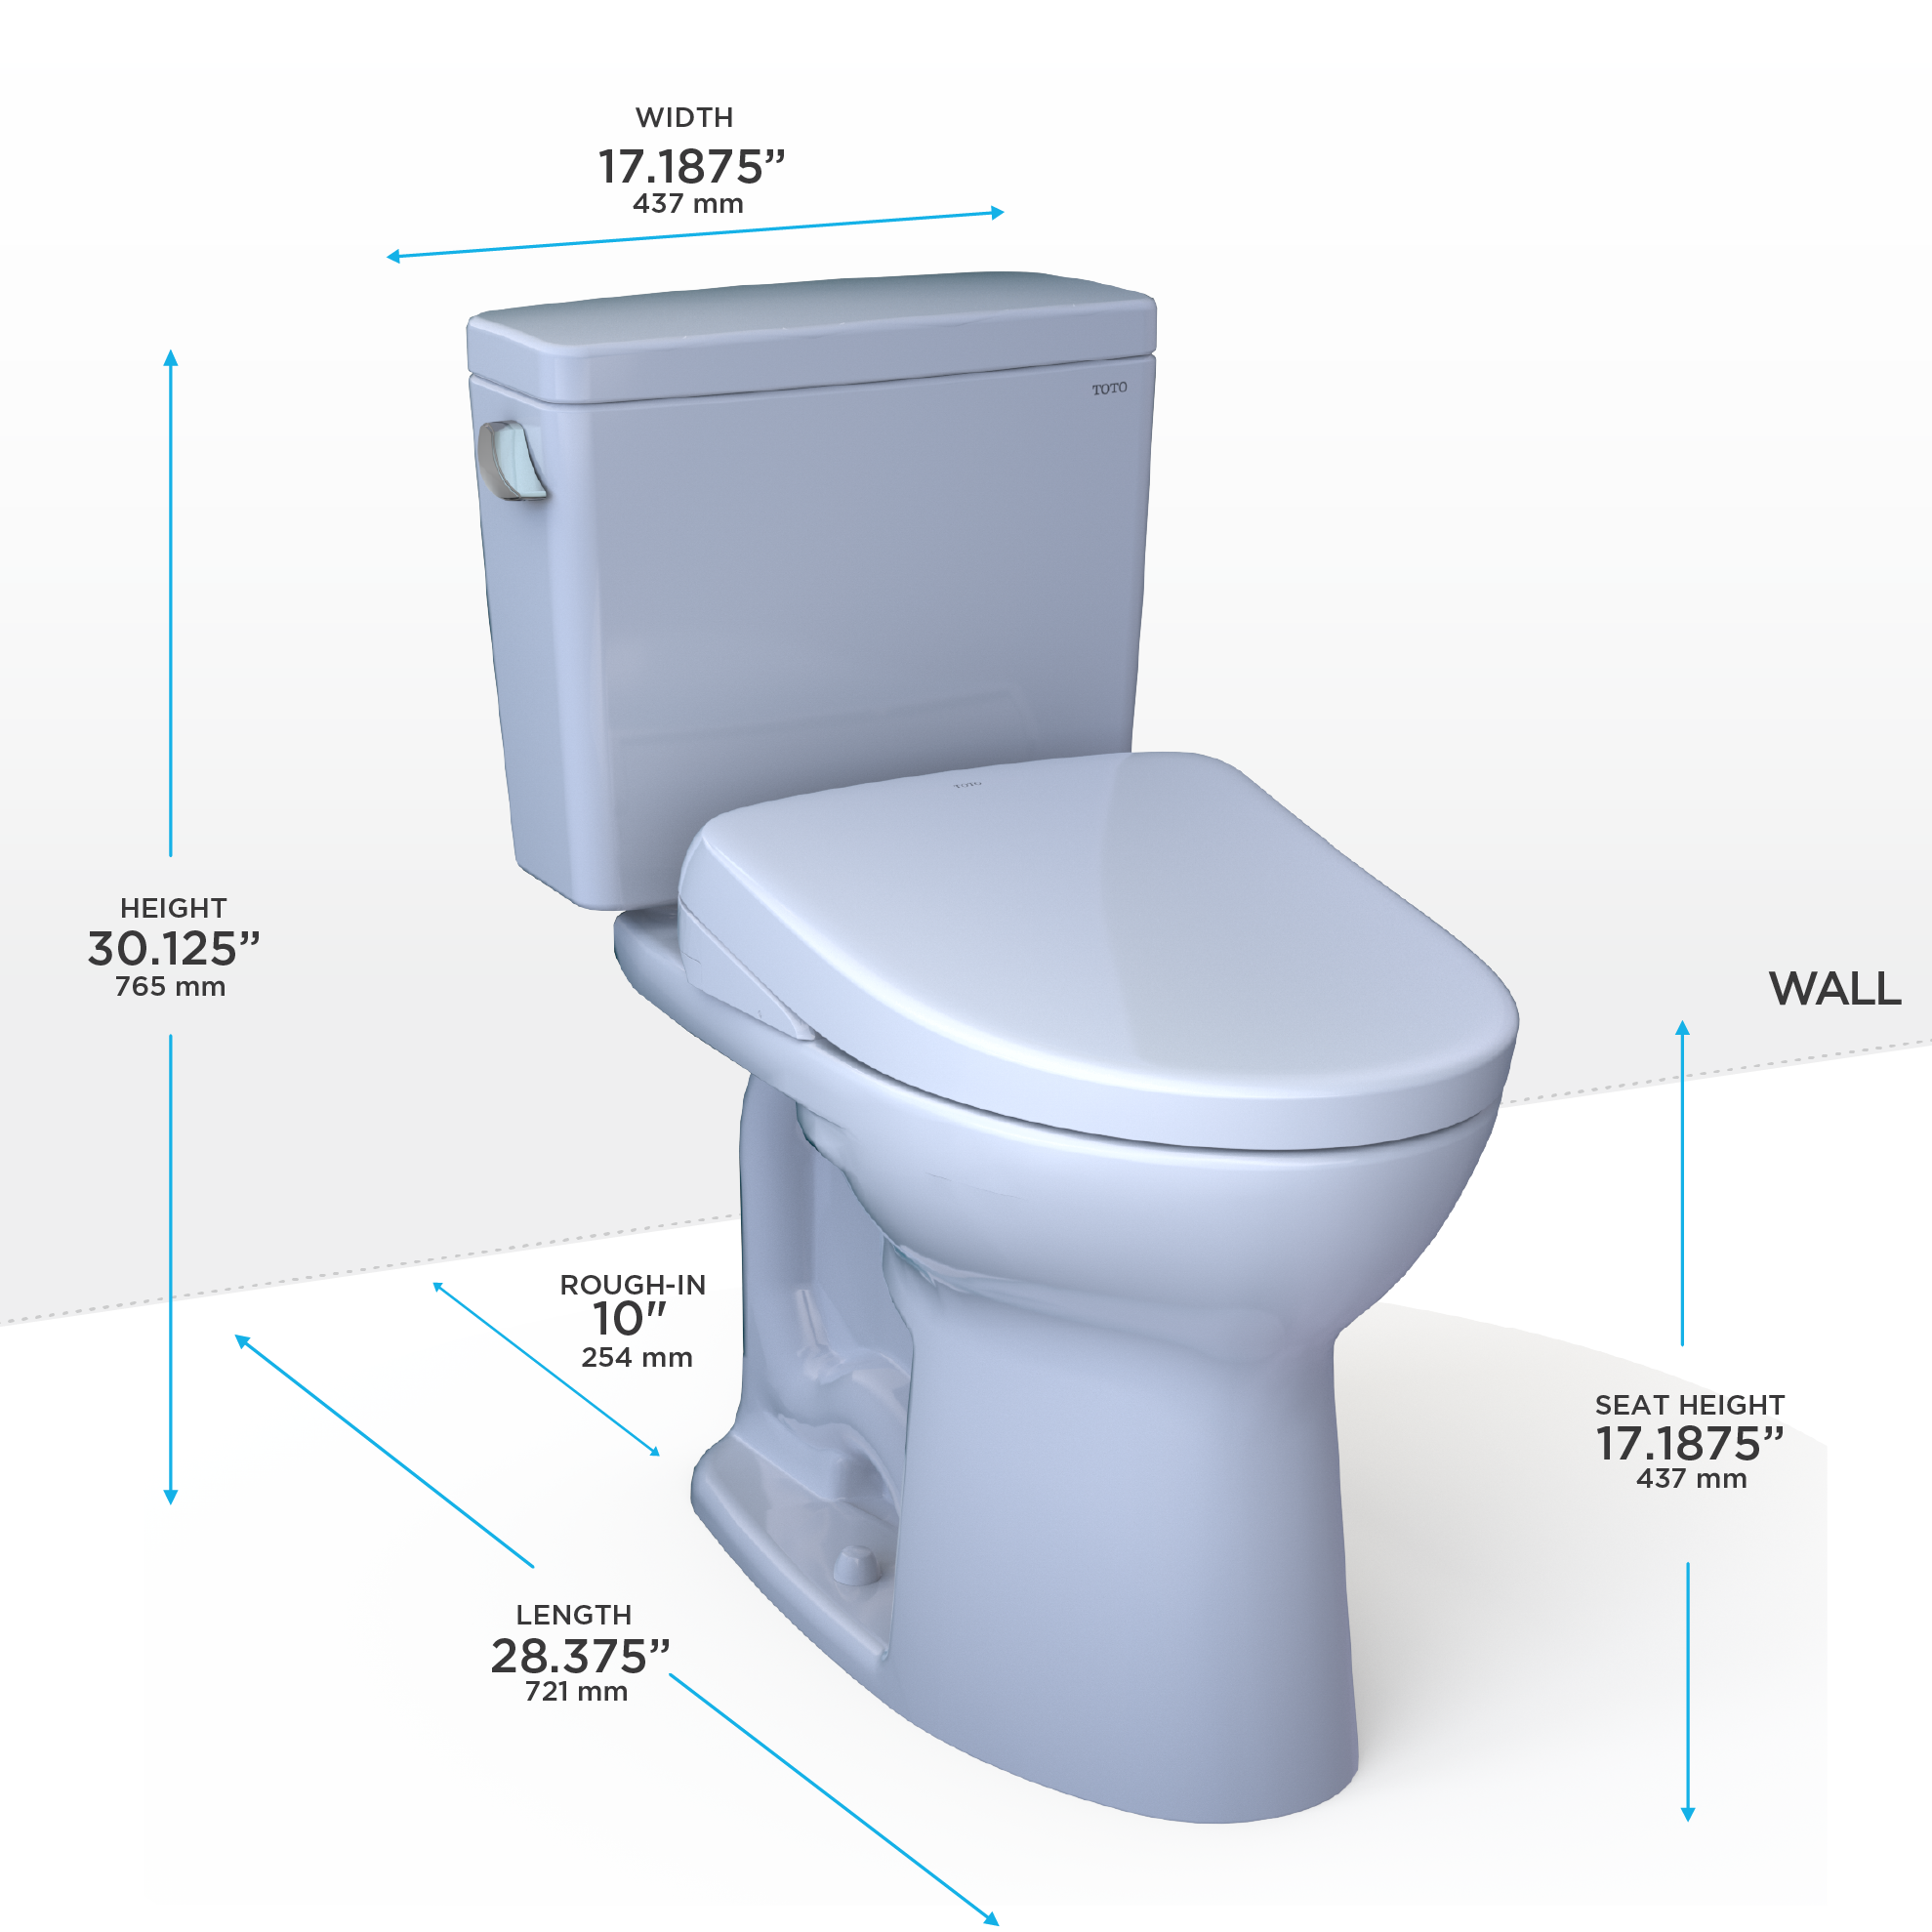 TOTO Drake WASHLET+ Two-Piece Elongated 1.28 GPF Universal Height TORNADO FLUSH Toilet with S7A Contemporary Bidet Seat, 10 Inch Rough-In, Cotton White - MW7764736CEFG.10#01, MW7764736CEFGA.10#01